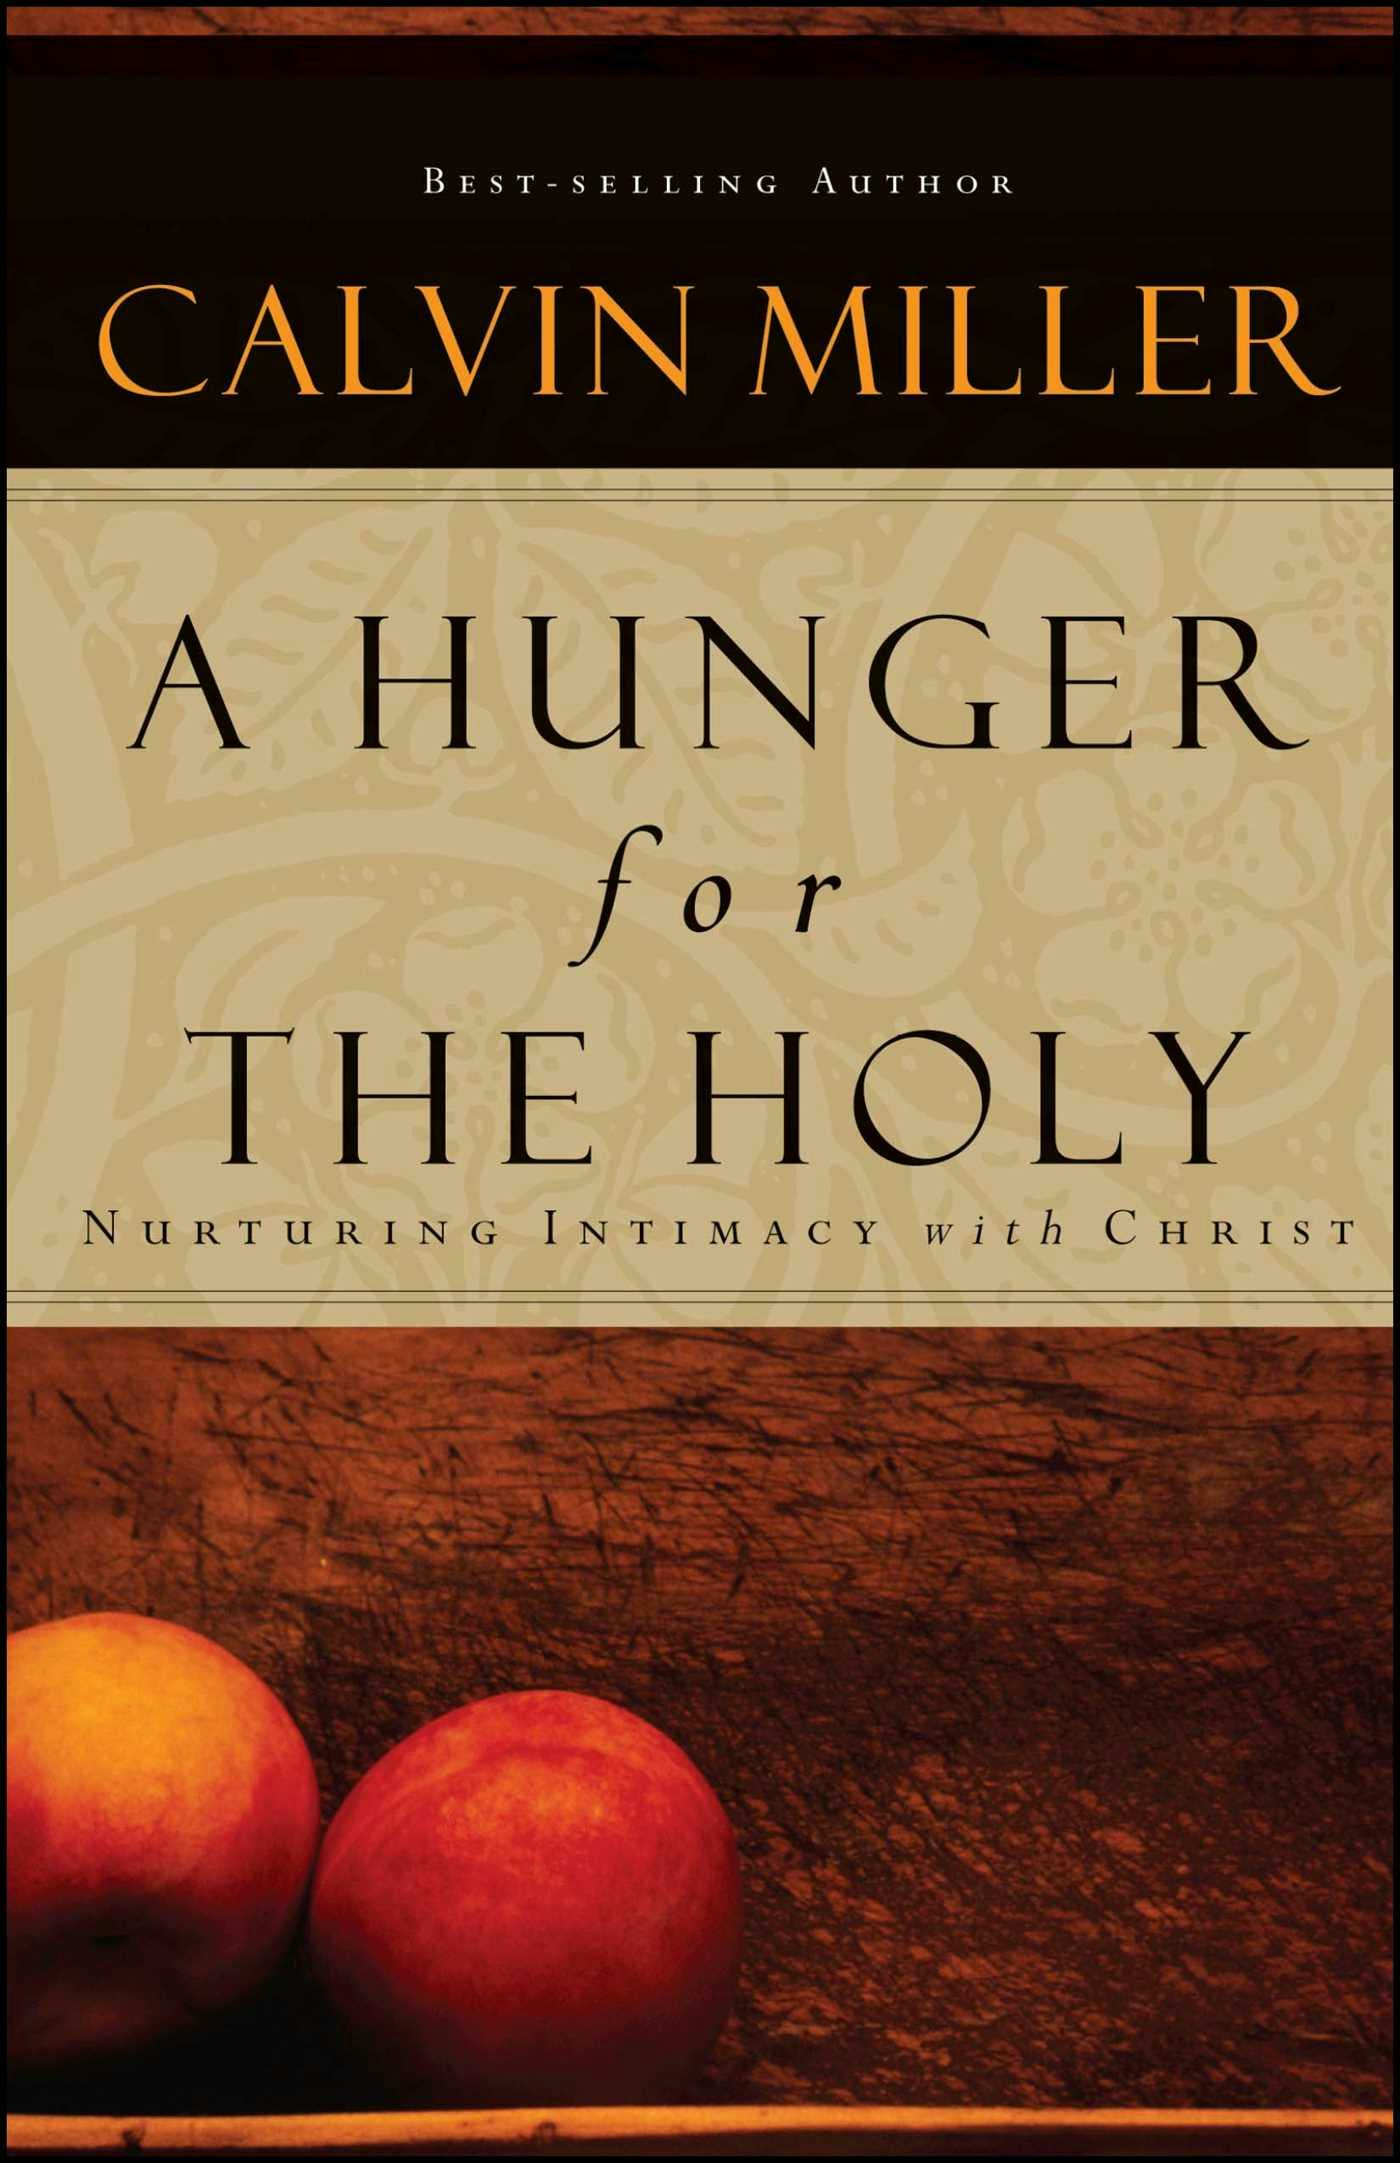 A Hunger for the Holy: Nuturing Intimacy with Christ - undefined